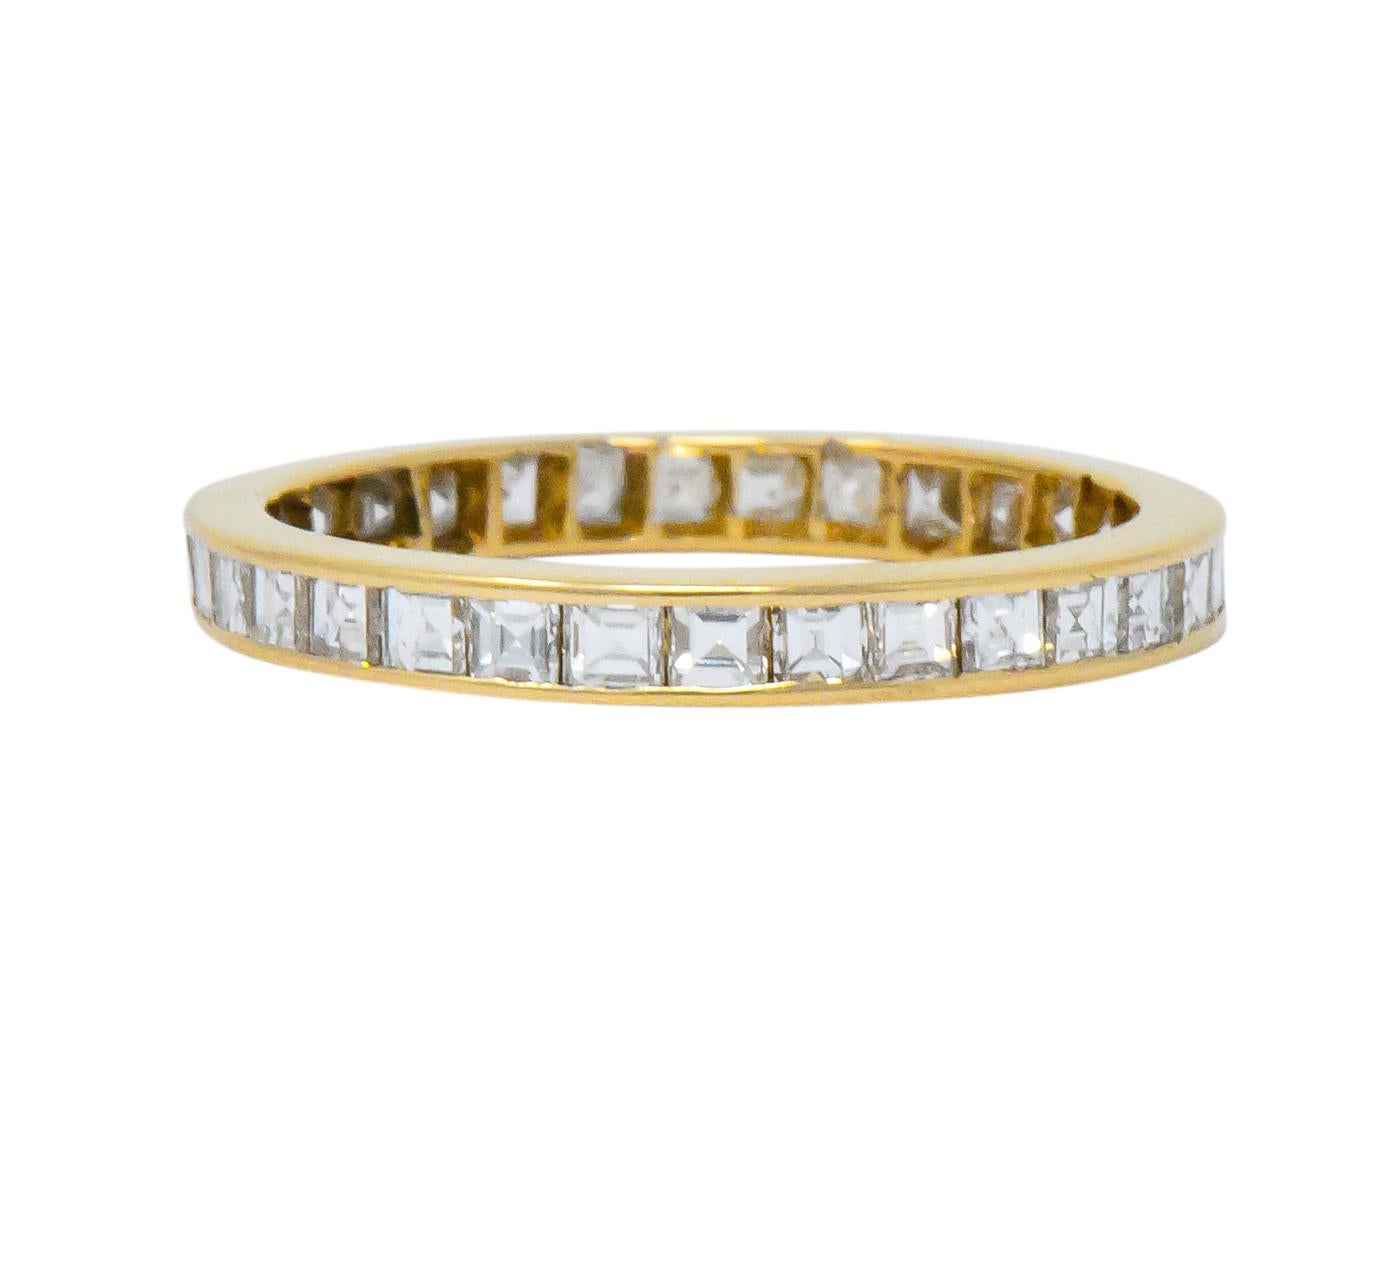 Set all the way around with square step cut diamonds

Thirty-two diamonds total, weighing approximately 1.30 carats, G/H color and VS to SI clarity

Channel  set for a sleek look

Tested as 14 karat gold

Ring Size: 5 & Not Sizable

Top measures 2.3